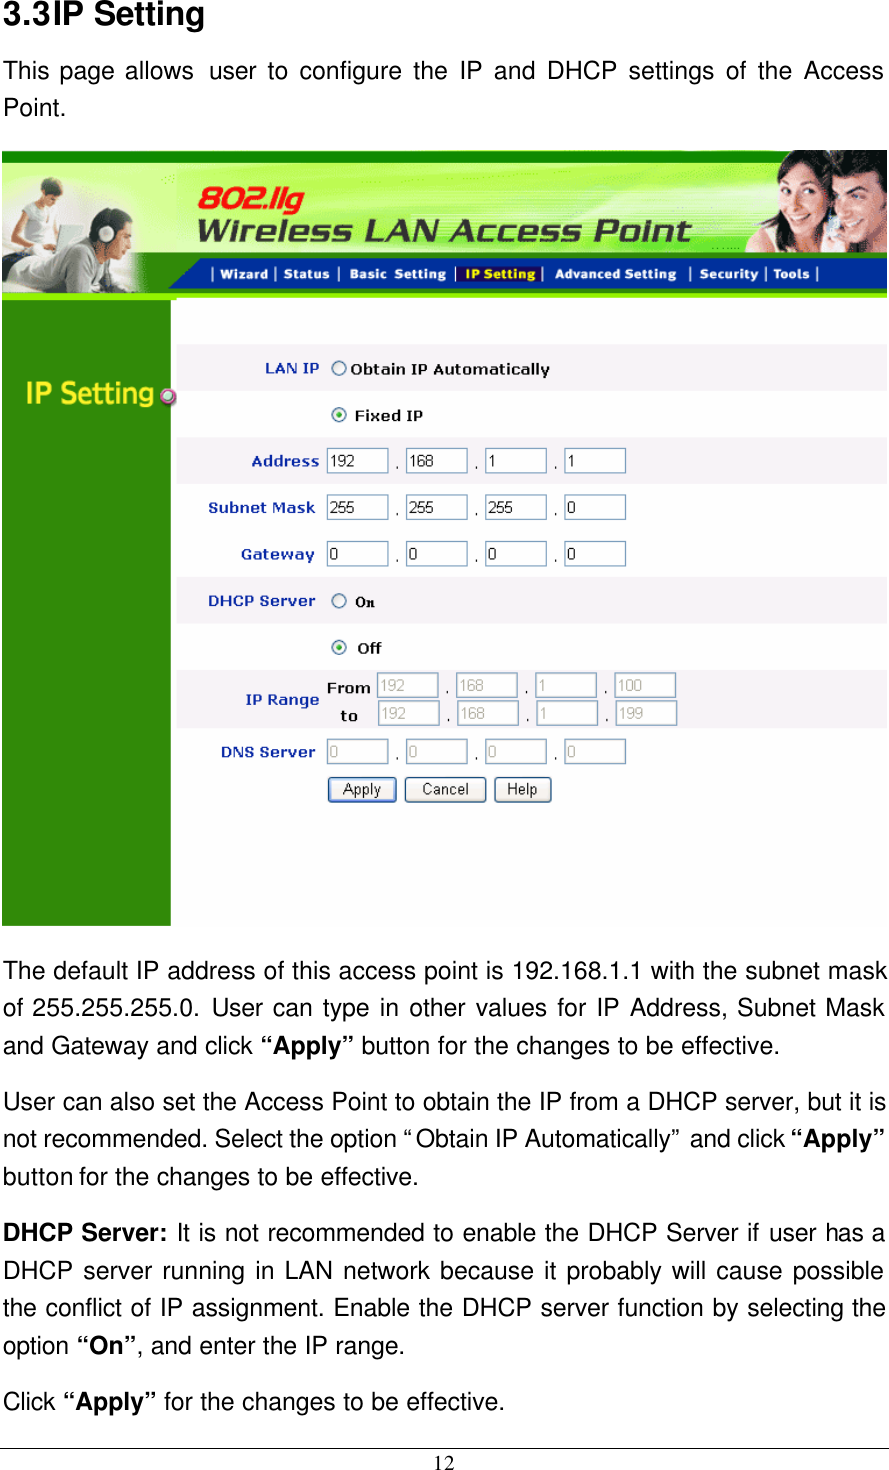  12 3.3 IP Setting This page allows  user to configure the IP and DHCP settings of the Access Point.  The default IP address of this access point is 192.168.1.1 with the subnet mask of 255.255.255.0. User can type in other values for IP Address, Subnet Mask and Gateway and click “Apply” button for the changes to be effective.   User can also set the Access Point to obtain the IP from a DHCP server, but it is not recommended. Select the option “Obtain IP Automatically” and click “Apply” button for the changes to be effective. DHCP Server: It is not recommended to enable the DHCP Server if user has a DHCP server running in LAN network because it probably will cause possible the conflict of IP assignment. Enable the DHCP server function by selecting the option “On”, and enter the IP range. Click “Apply” for the changes to be effective. 